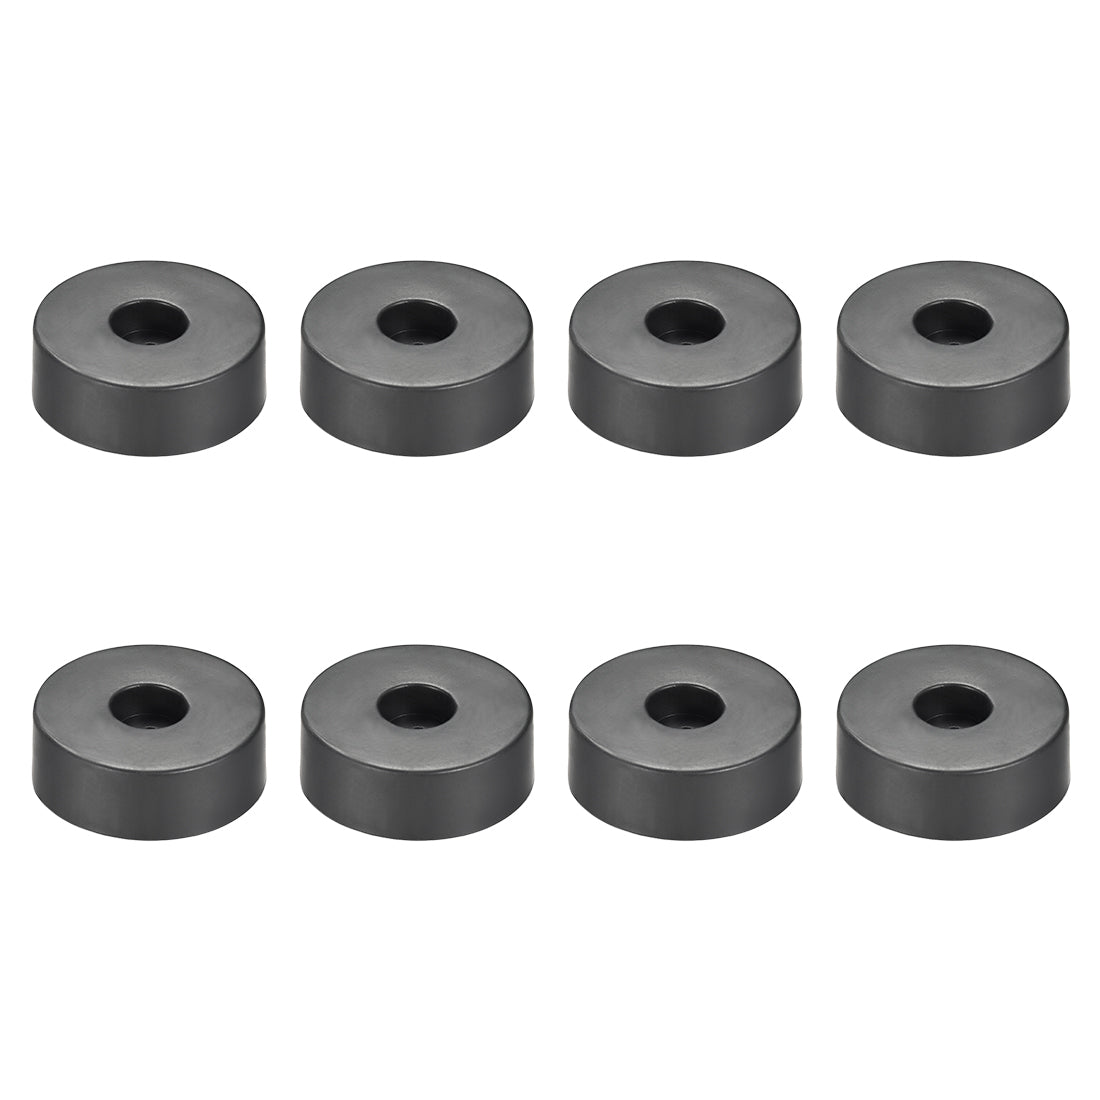 uxcell Uxcell 8 Pcs D45xH15mm Rubber Feet Anti-Vibration Base Pad Stand for Speaker Guitar Amplifier HiFi